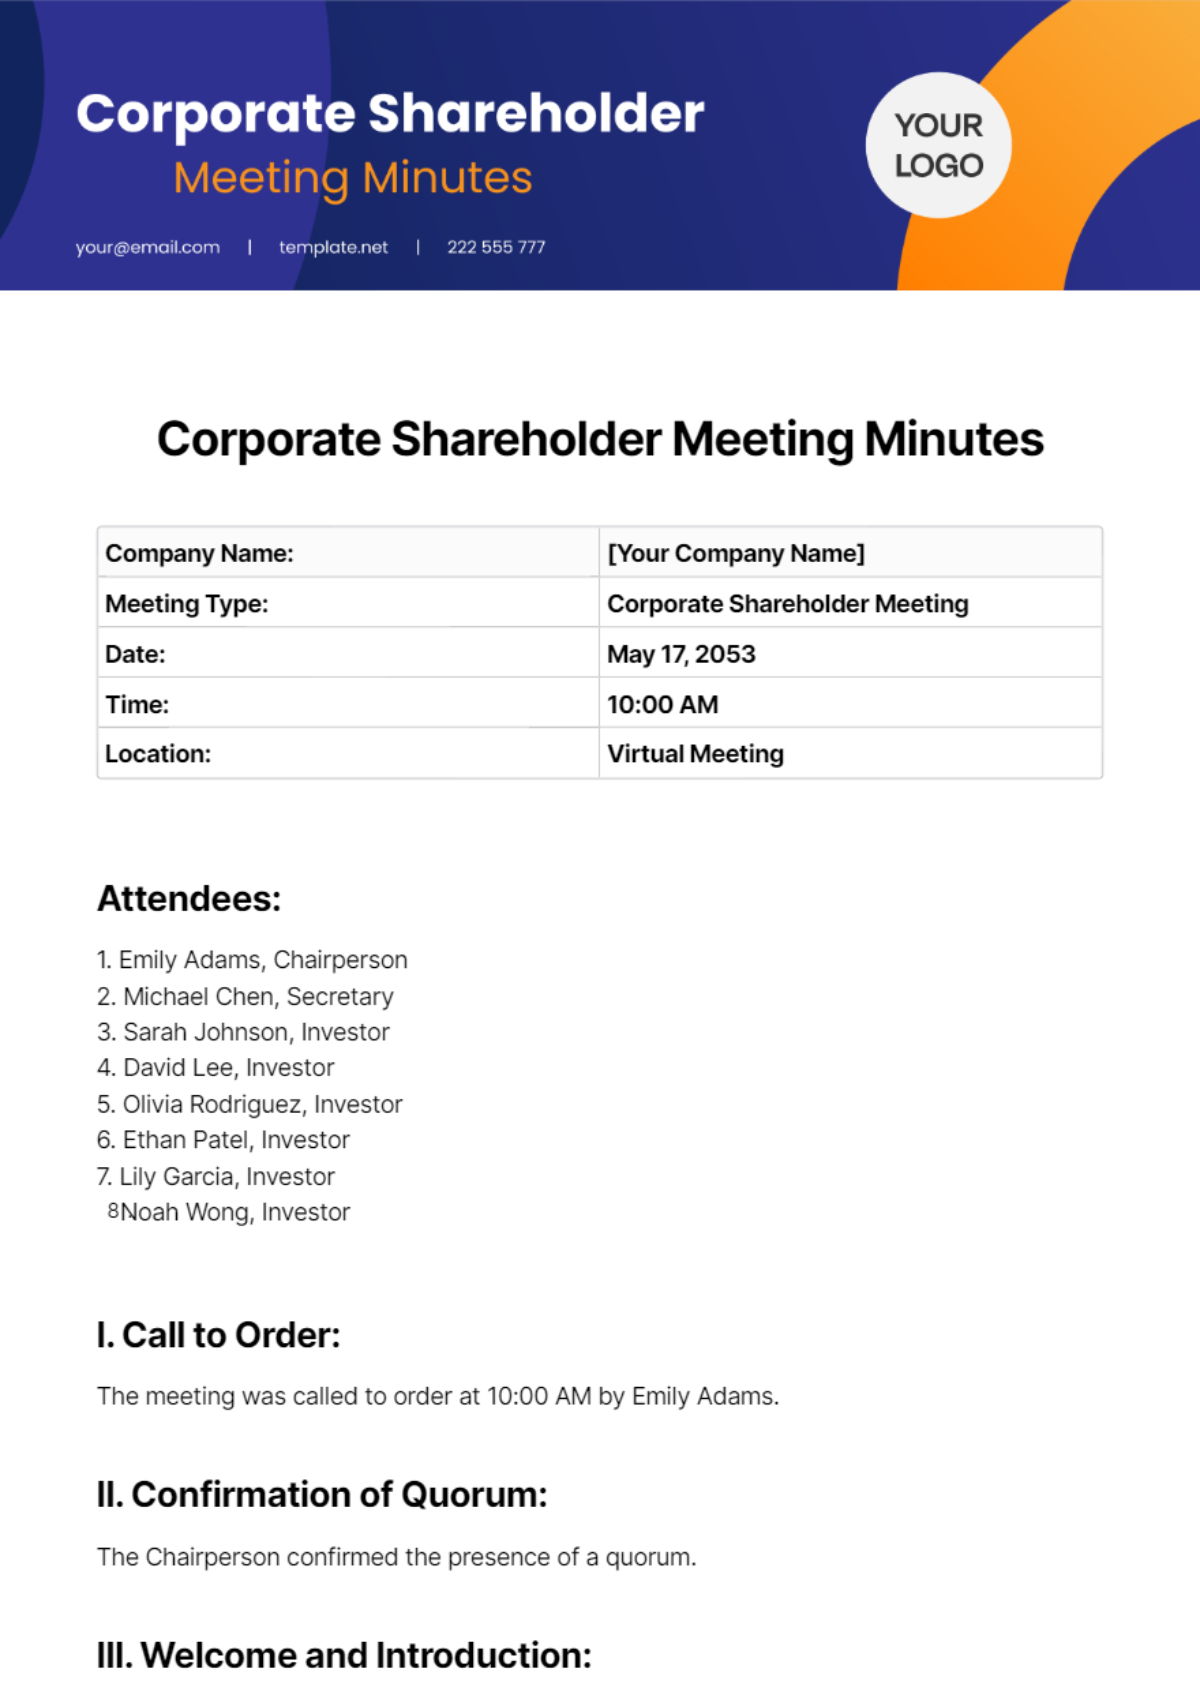 Corporate Shareholder Meeting Minutes Template